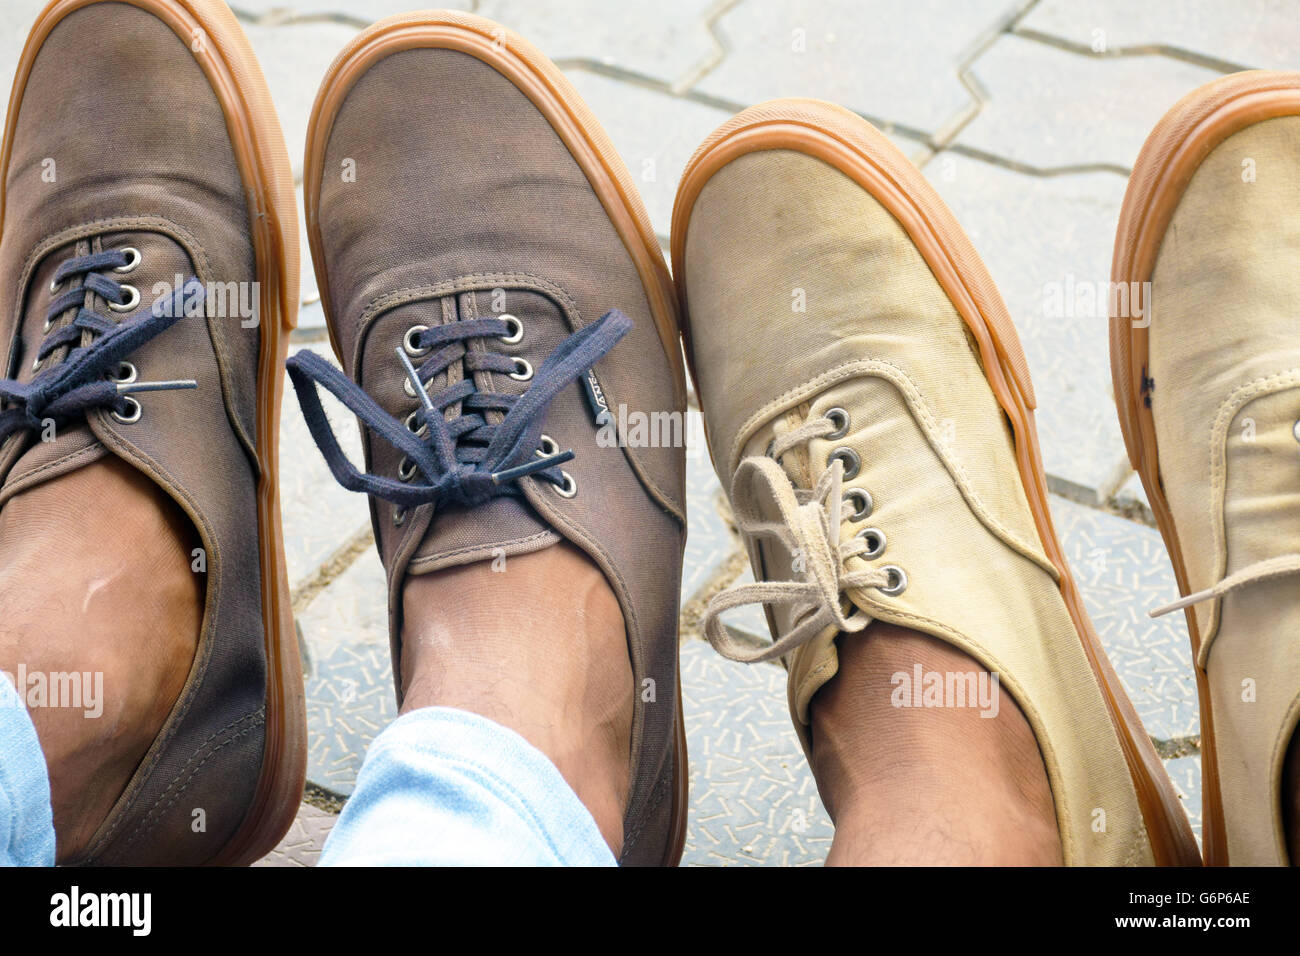 Vans The Wall High Resolution Stock Photography and